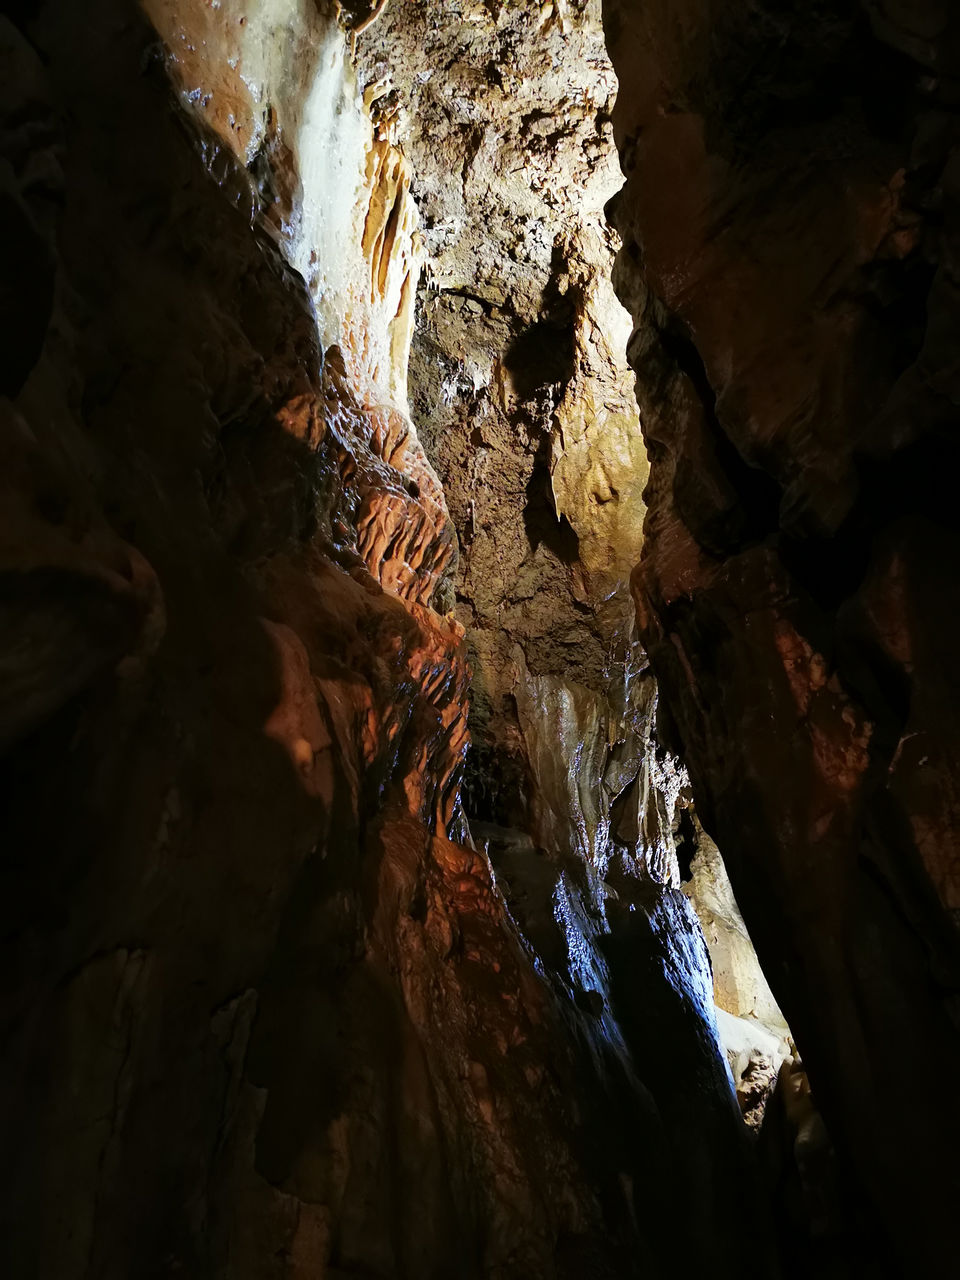 rock, cave, rock formation, caving, geology, stalactite, no people, nature, indoors, physical geography, beauty in nature, illuminated, low angle view, pattern, non-urban scene, textured, tranquility, eroded, rough, stalagmite